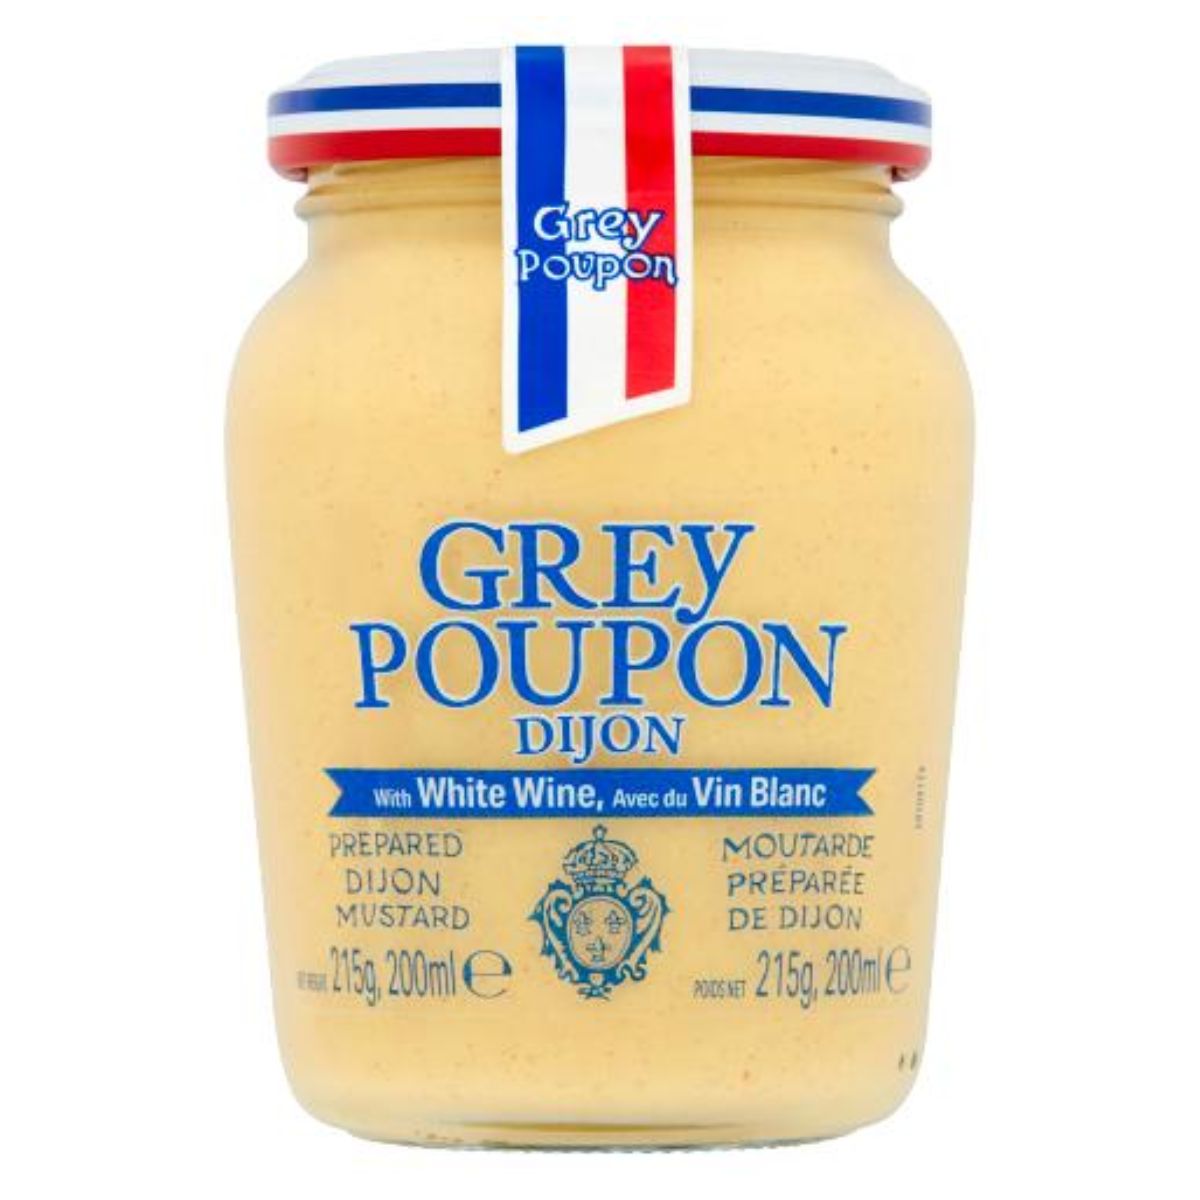 A jar of Grey Poupon Prepared Dijon Mustard with white wine, labeled in both English and French, displaying a crest and a ribbon in the colors of the French flag.